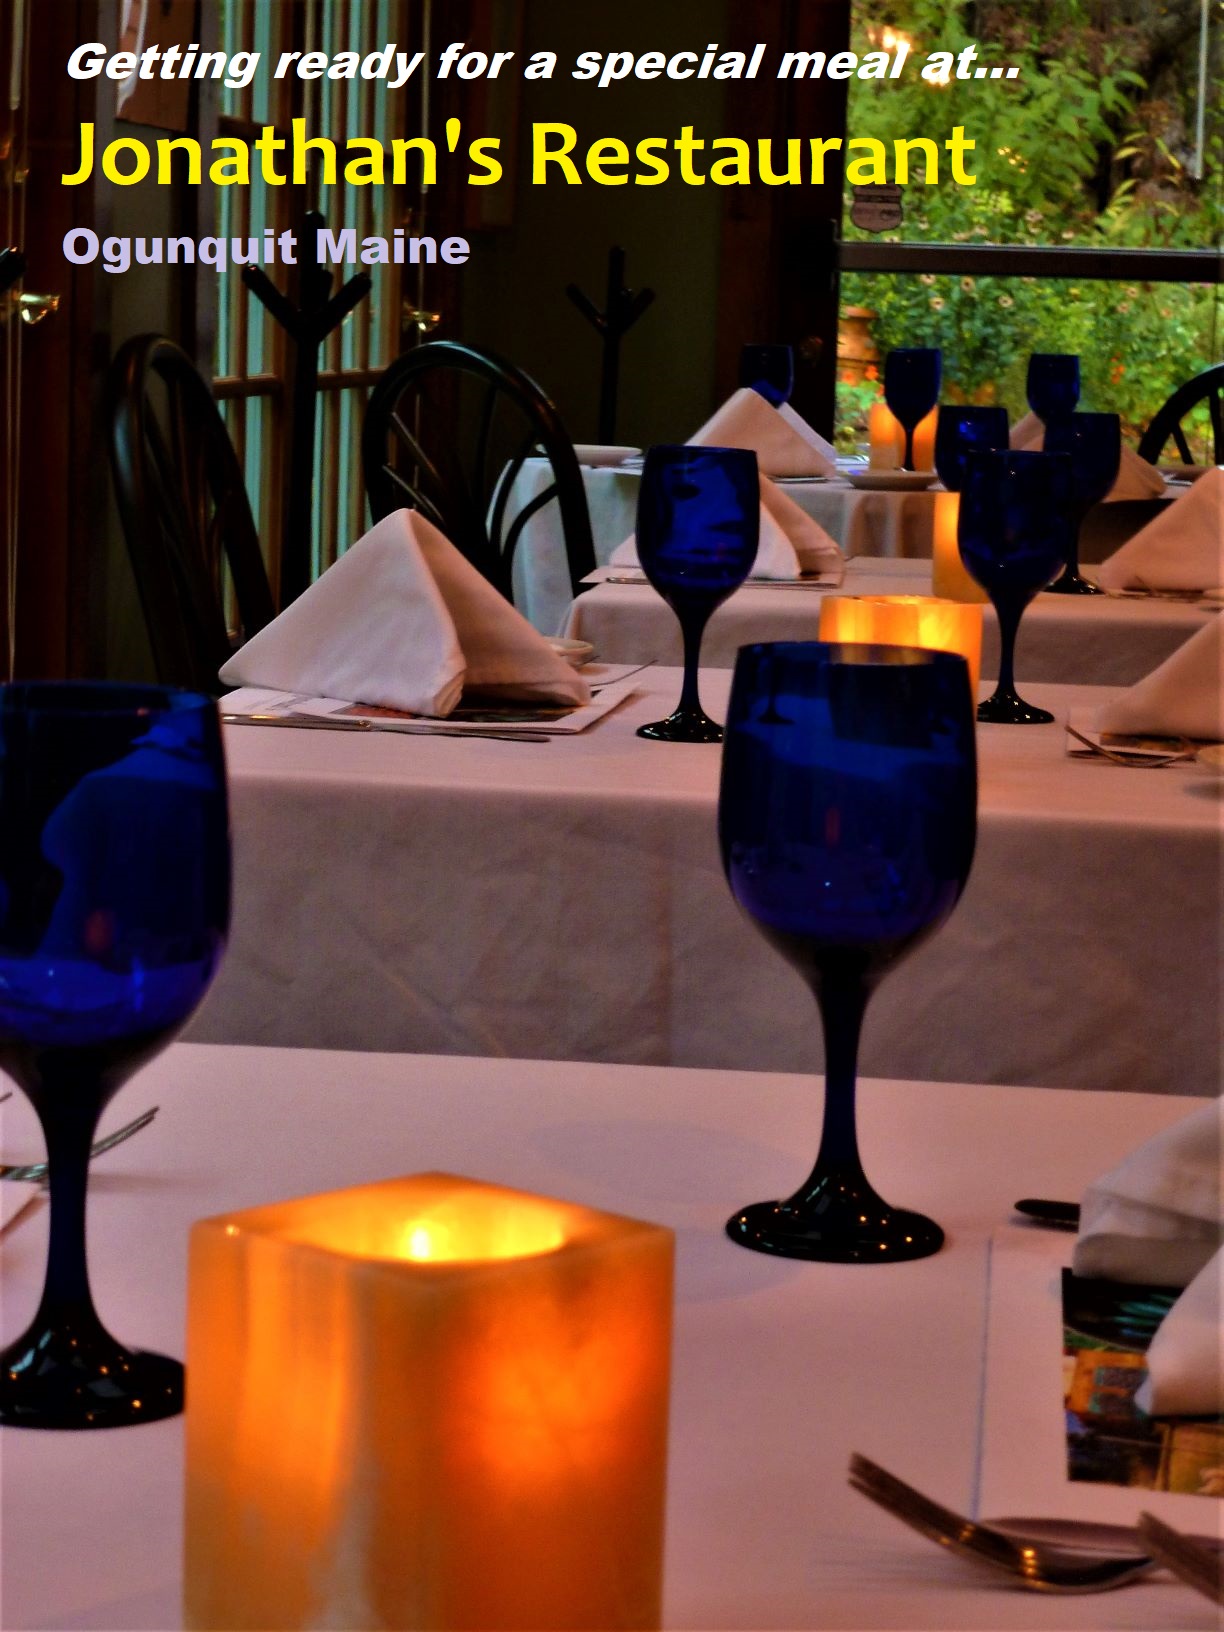 Finding a very special restaurant in Ogunquit, Maine...